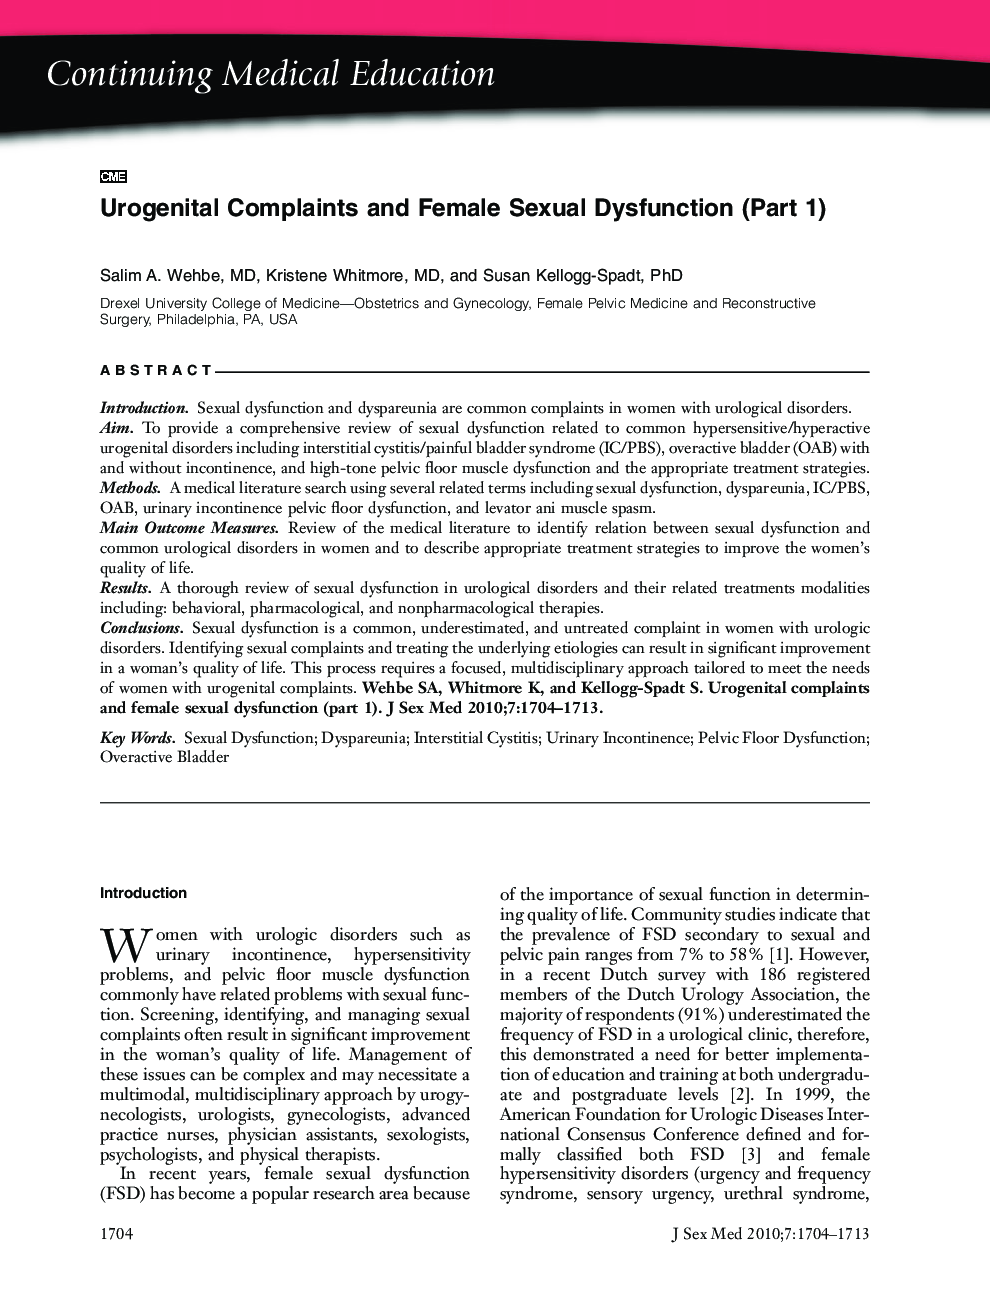 Continuing Medical Education: Urogenital Complaints and Female Sexual Dysfunction (Part 1) (CME)